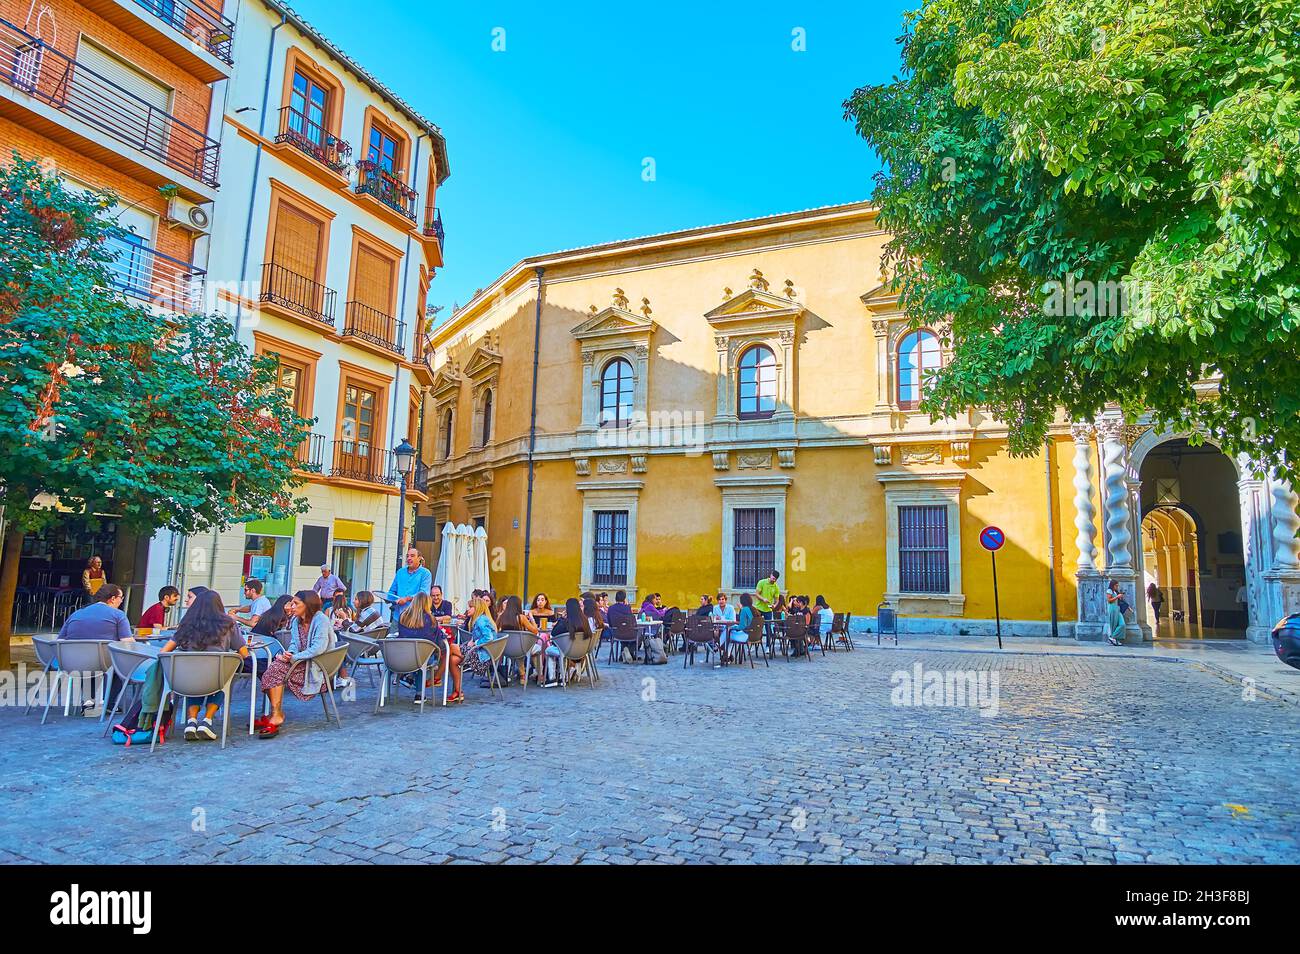 GRANADA, SPAIN - SEPT 27, 2019: University Square with outdoor cafes and historic building of Faculty of Law of Granada University, decorated with Sol Stock Photo